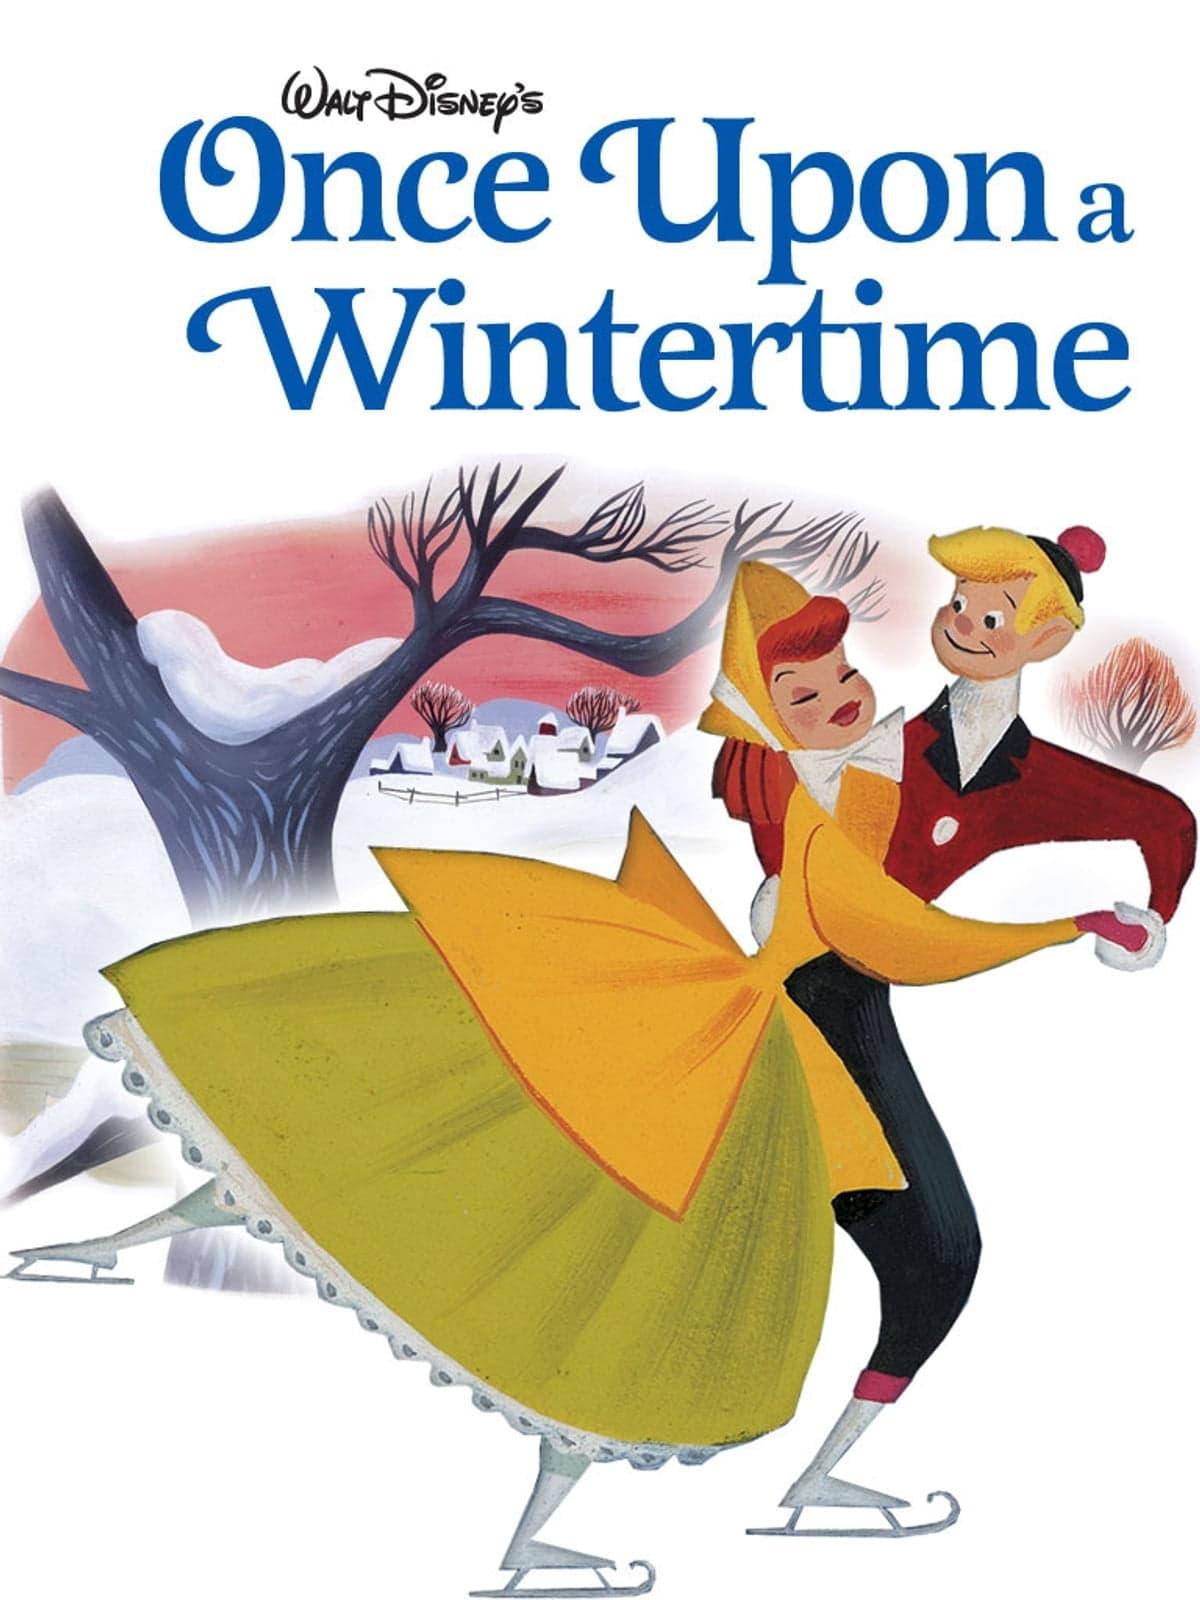 Once Upon a Wintertime poster